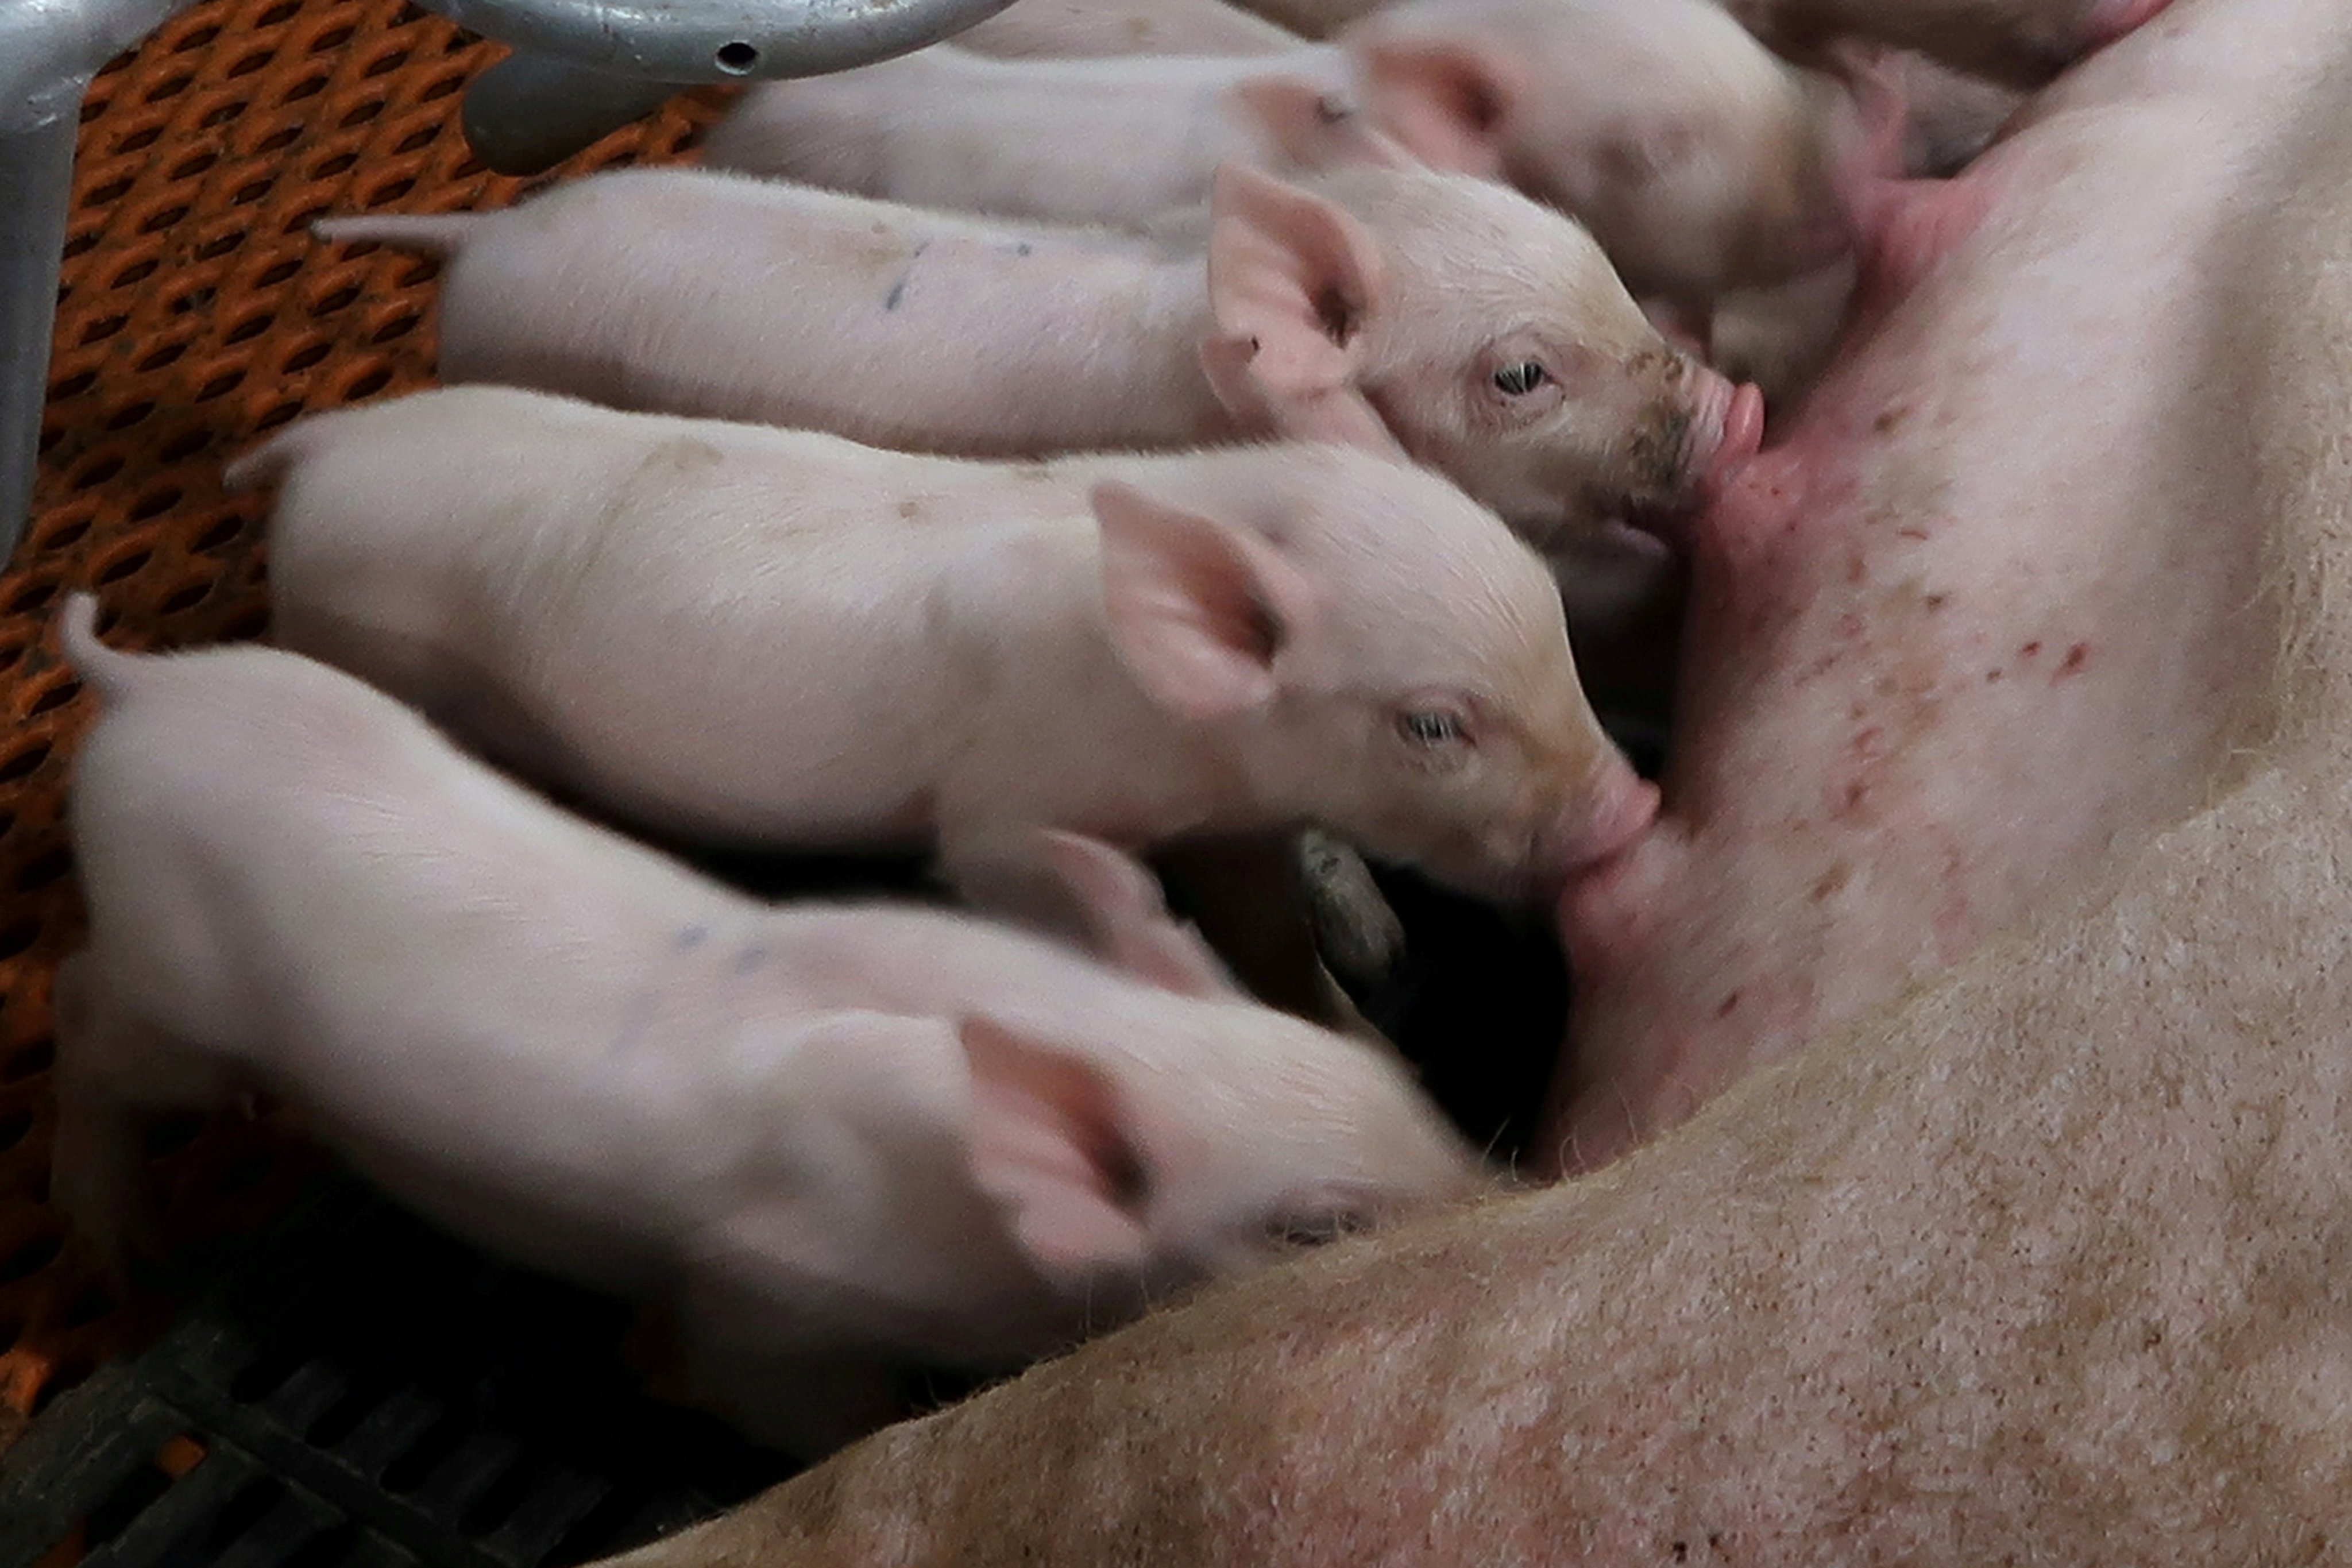 Vietnam has developed an African swine fever vaccine for pigs in partnership with the United States, and is aiming to become the first global commercial exporter, an official said. Photo: Reuters